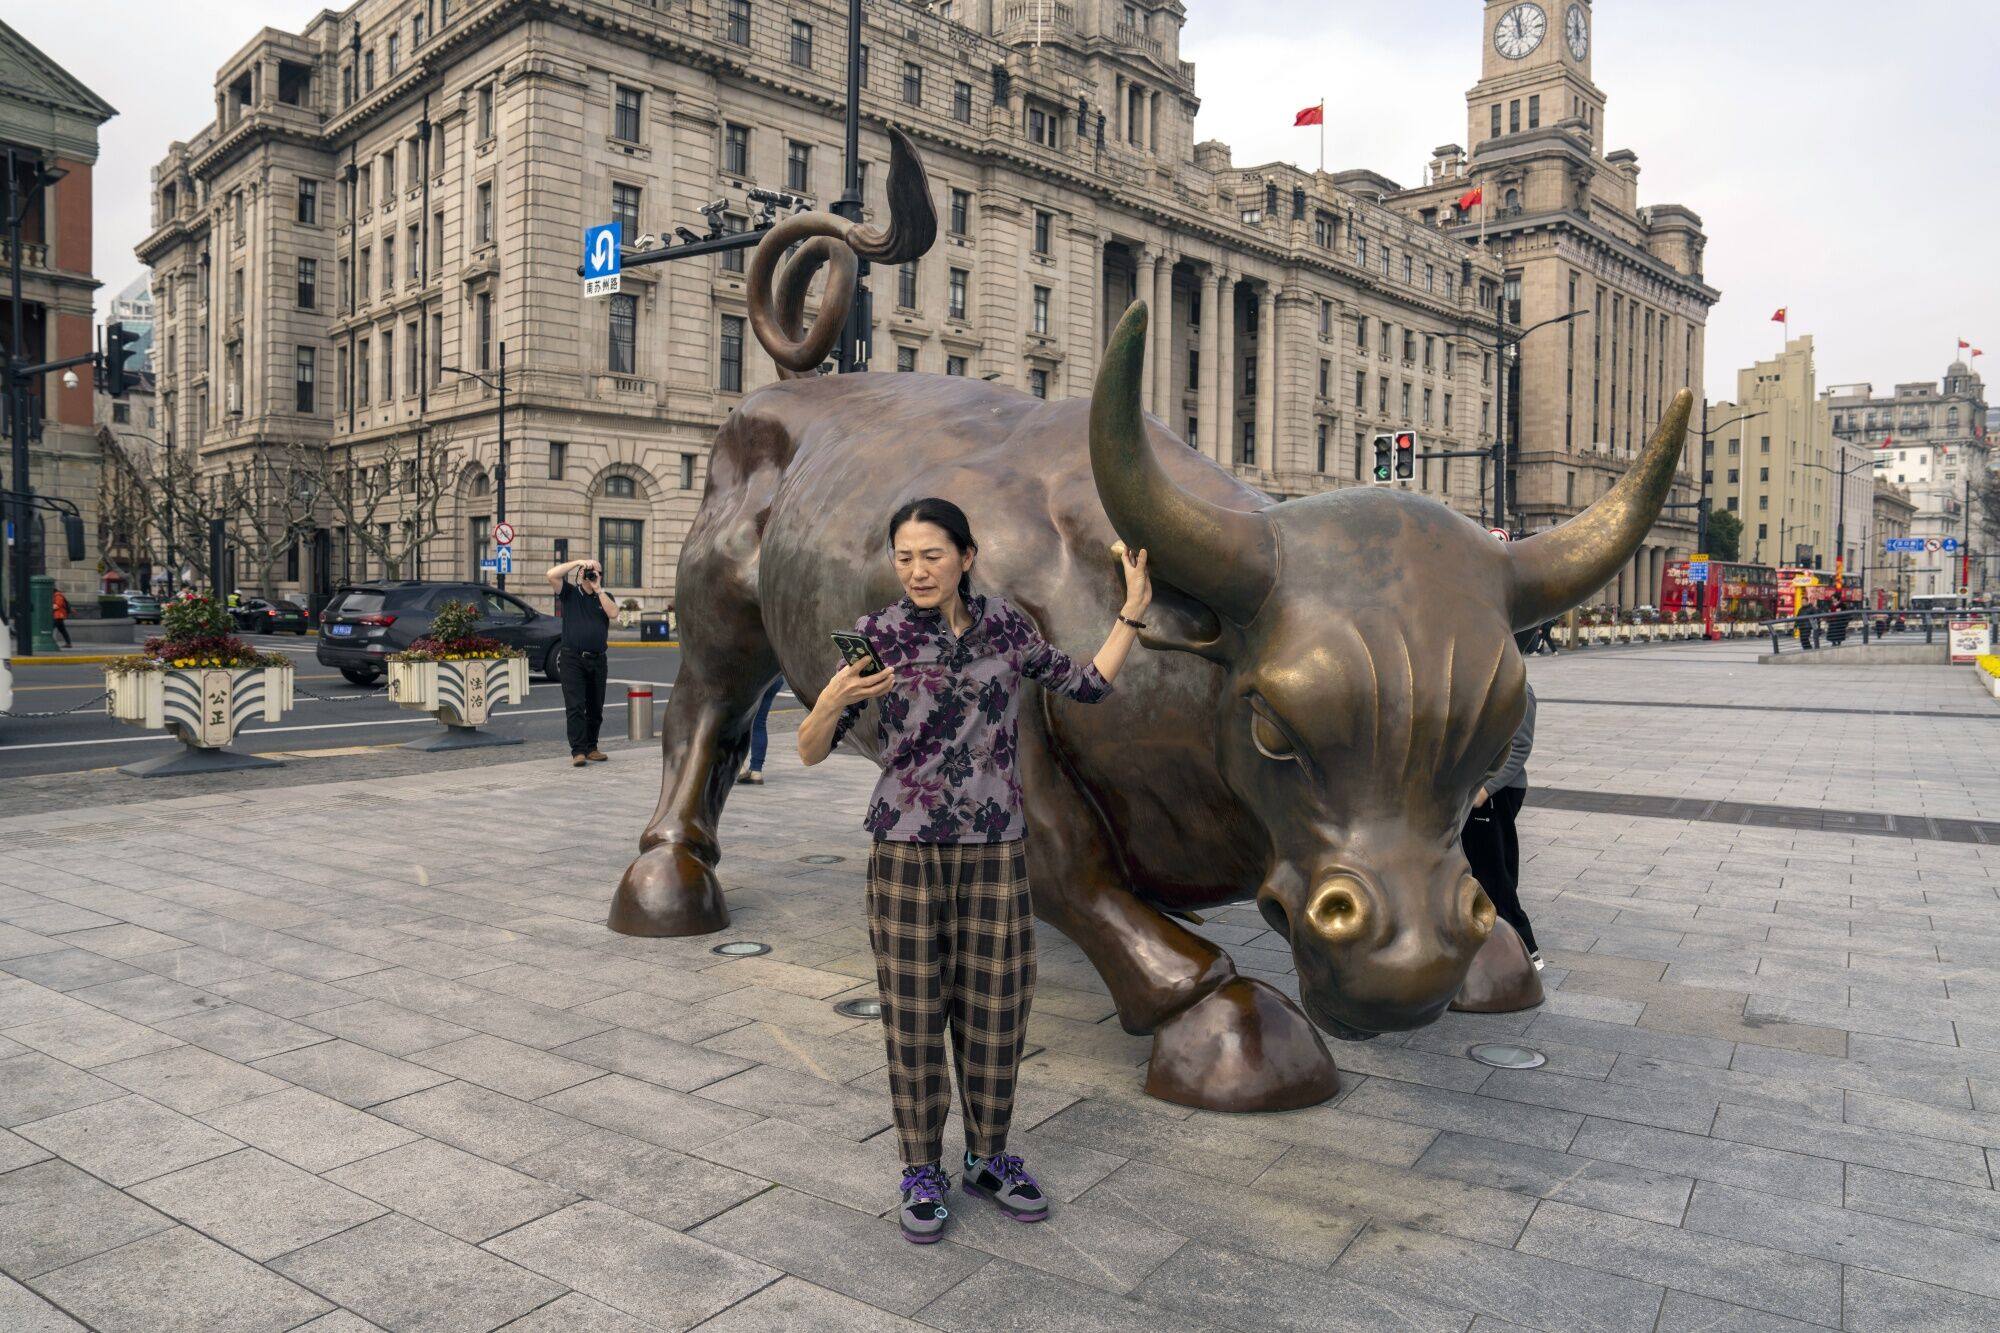 A woman poses for photographs with the Bund Bull in Shanghai on February 19. China’s 400 million-strong middle class is central to its future economic prosperity, creating an urgent need for reform to reverse trends of stagnant wages and rising fear of falling out of the middle class. Photo: Bloomberg